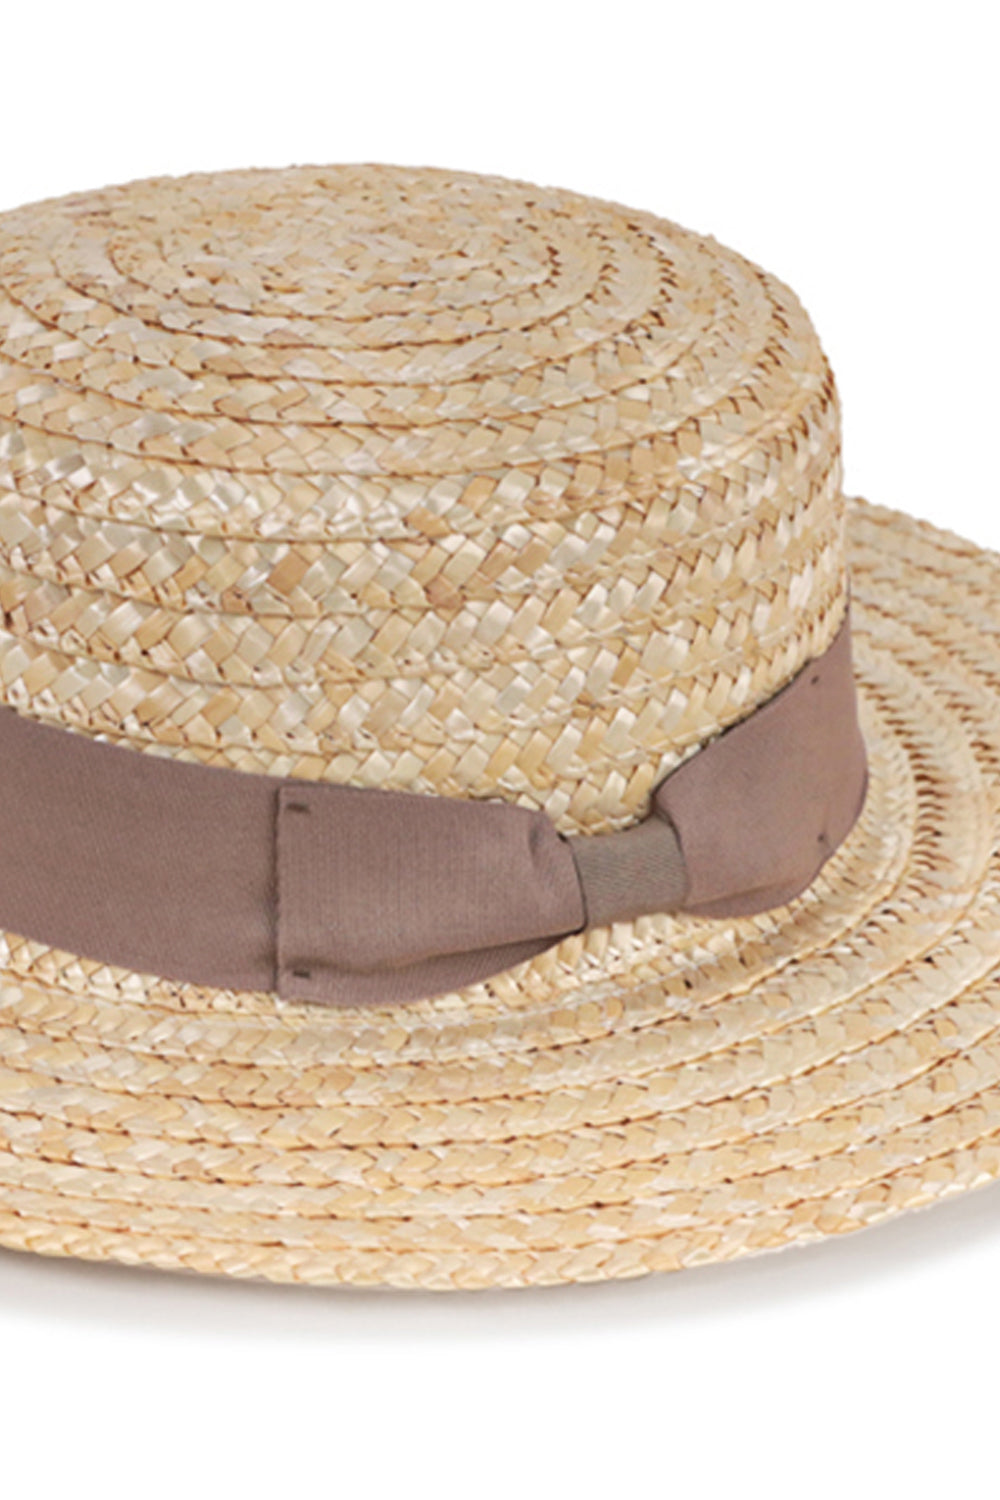 My Accessories London Boater Straw Hat With Grosgrain Bow Trim in Beige | Beach | Hat | Hats | Holiday | Summer | Races | Coquette | Cottage | Occasion | Women's Accessories | Women's |